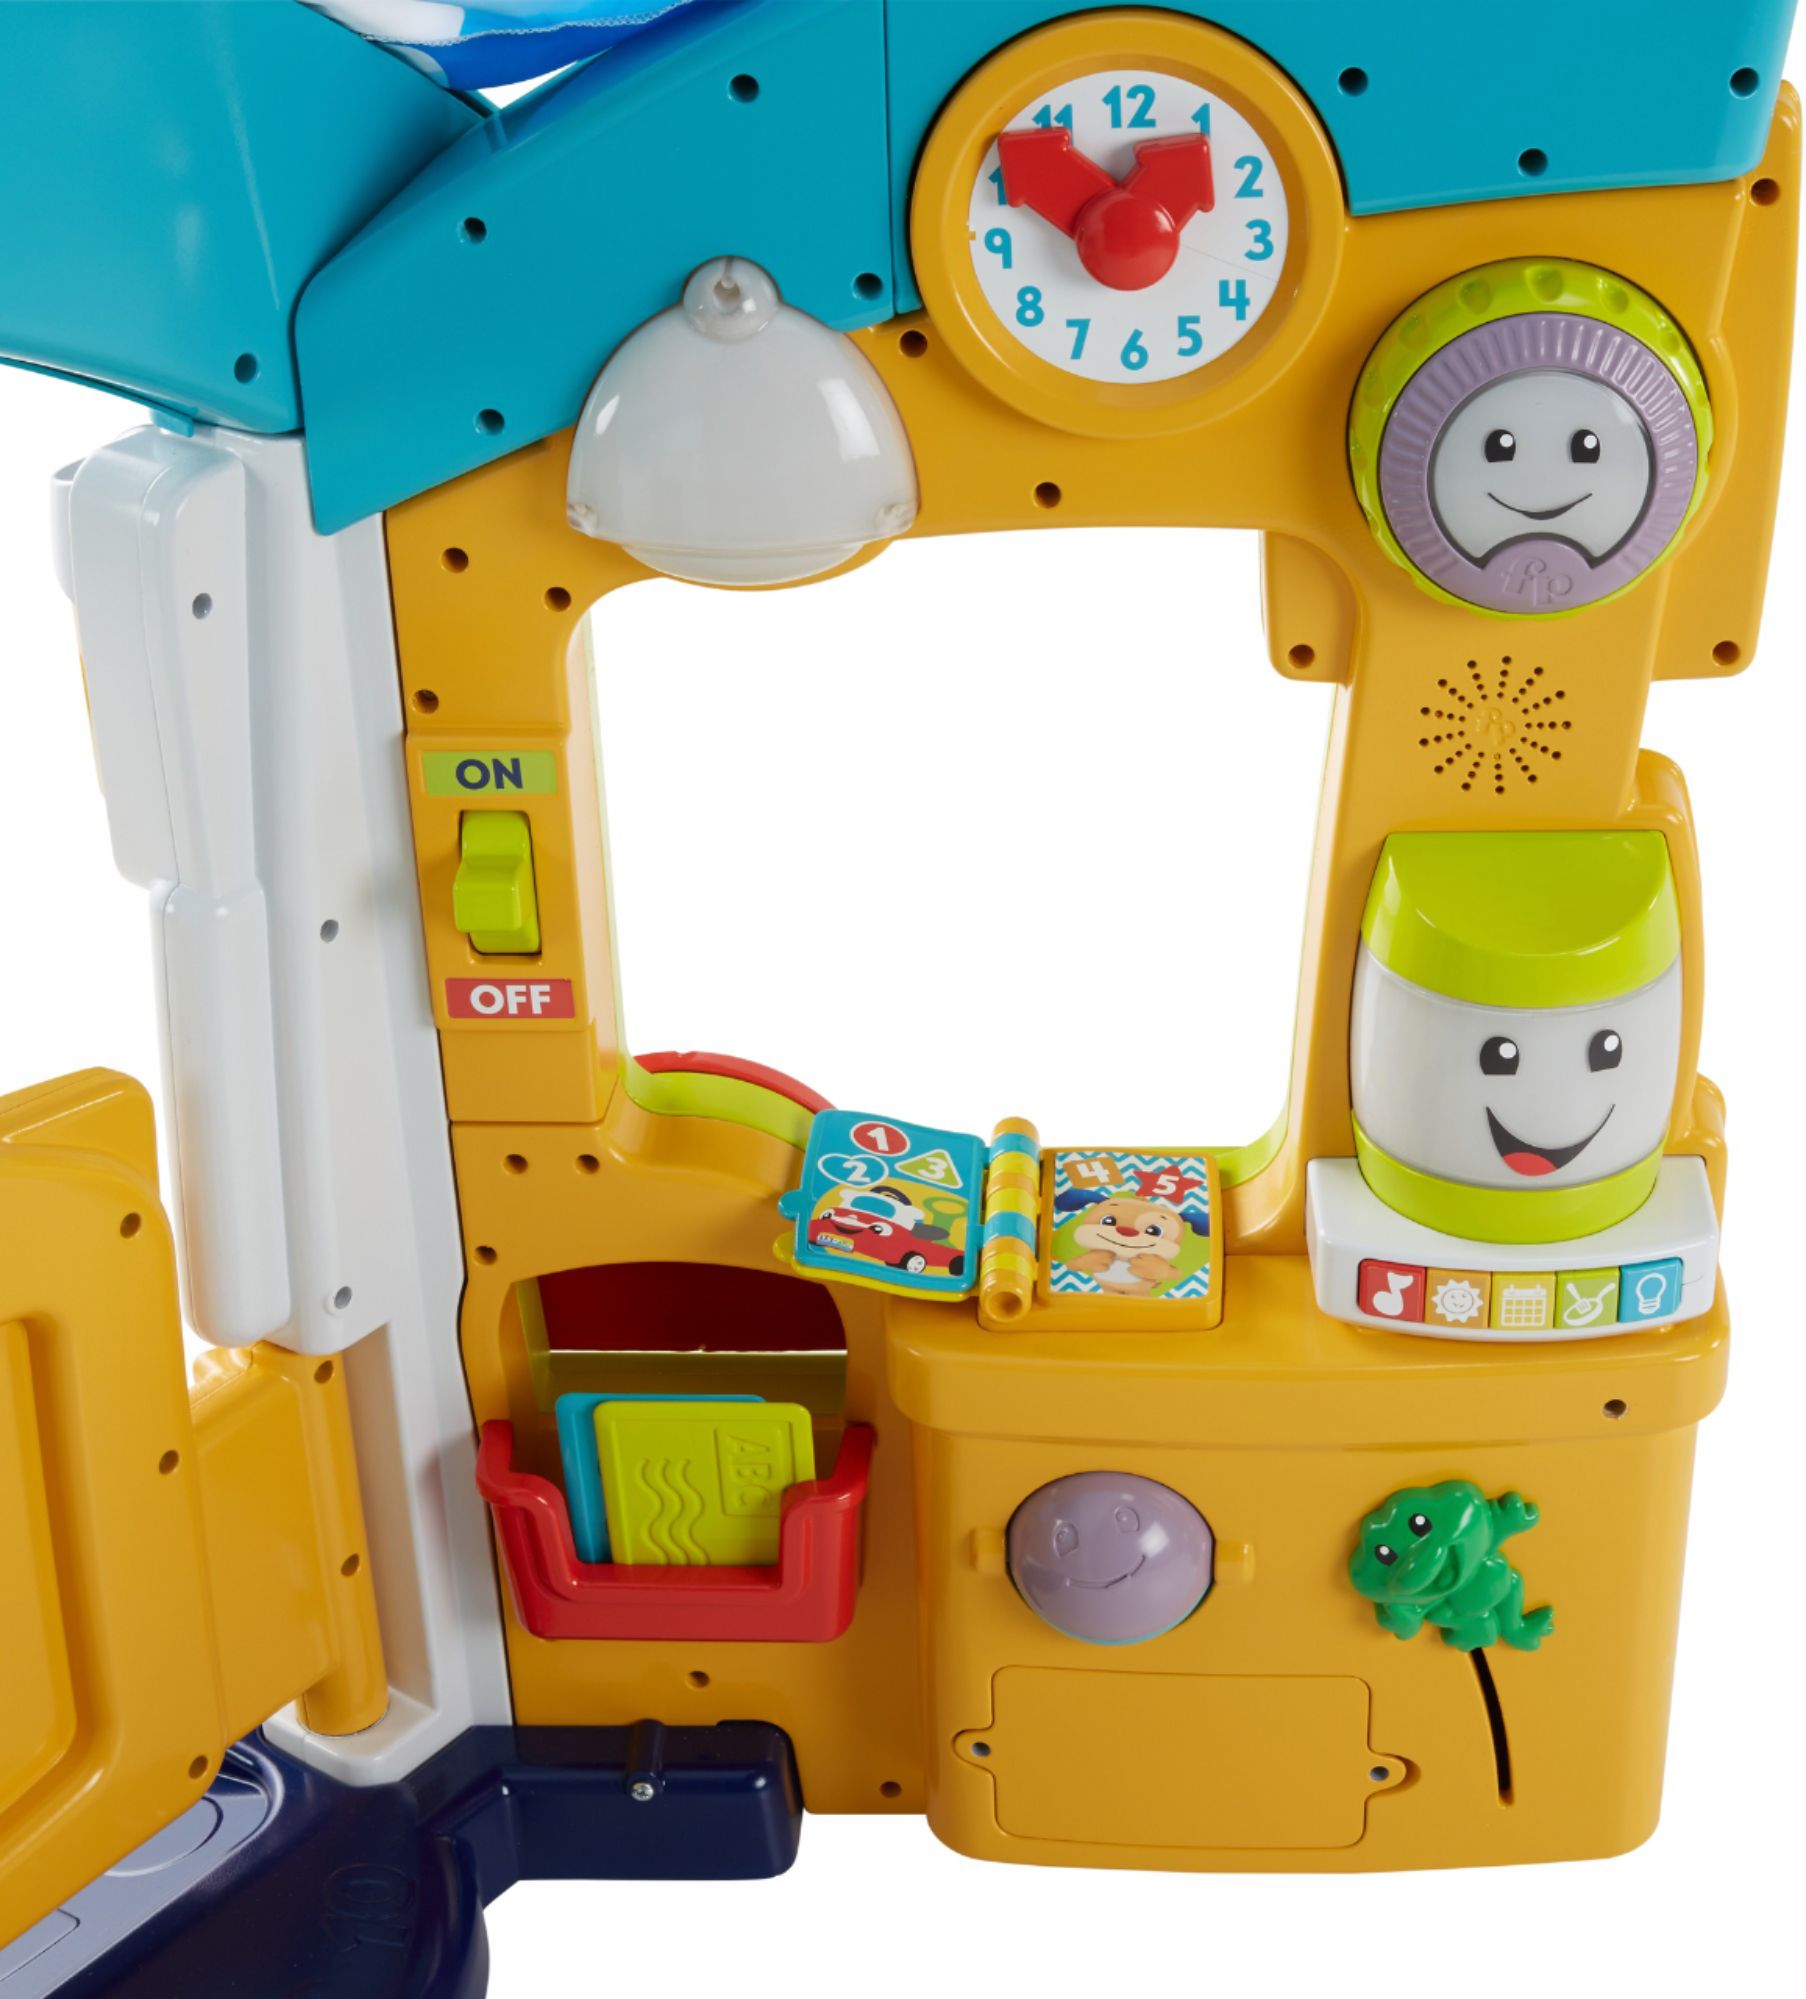 fisher price laugh and learn smart learning home